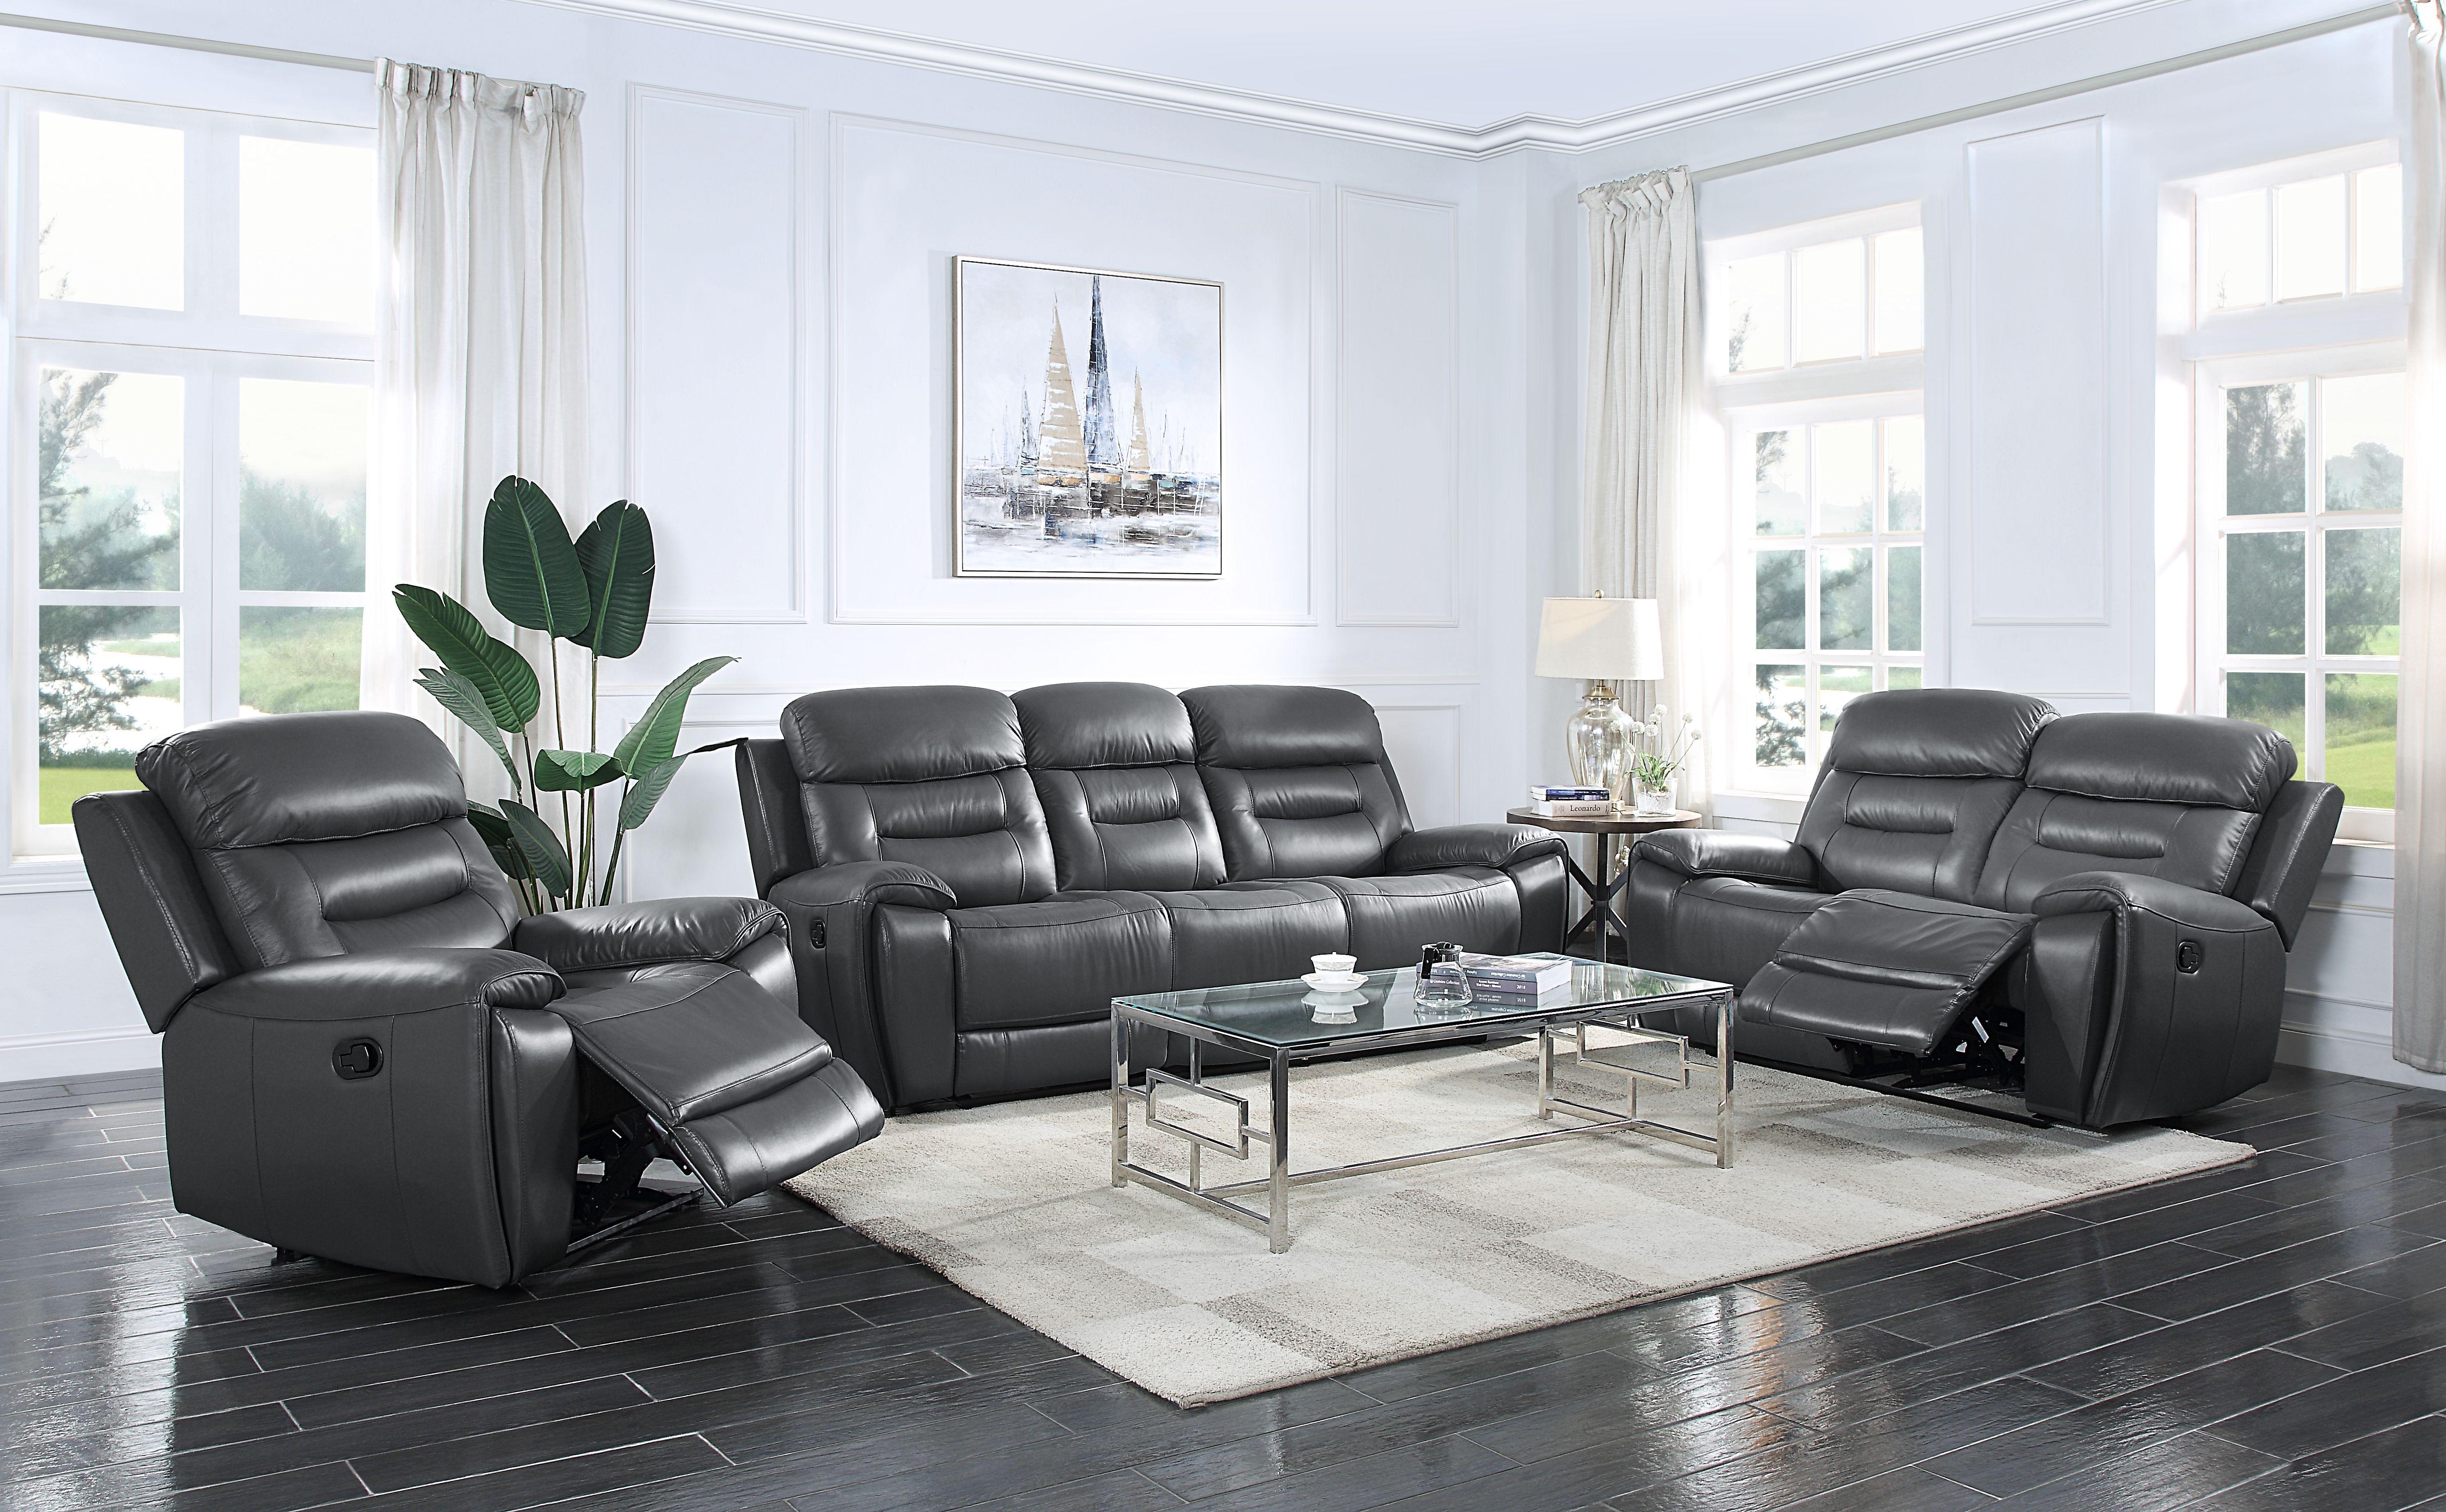 

    
LV00072 Contemporary Gray Leather Sofa by Acme Lamruil LV00072
